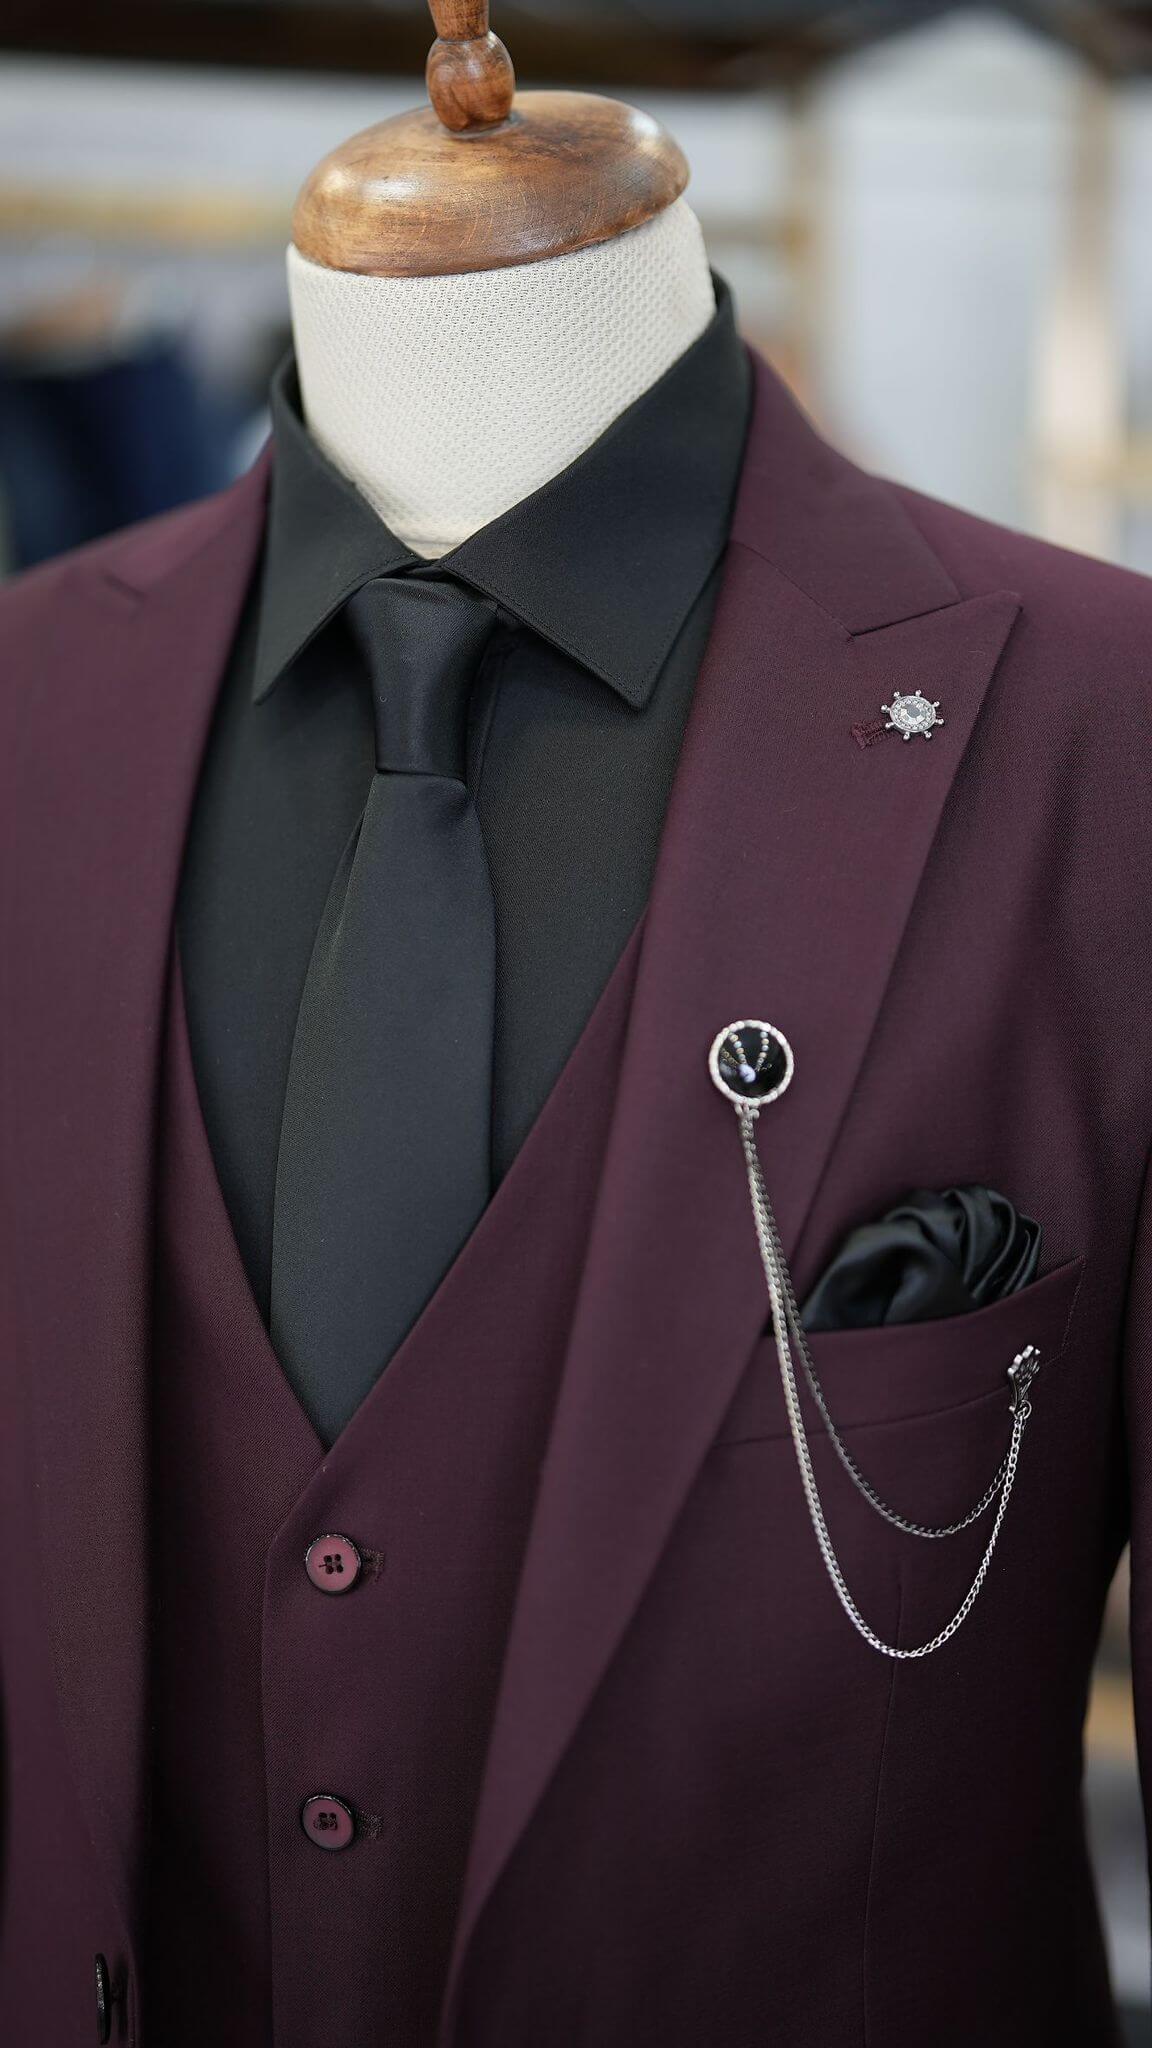 A Burgundy Suit on display.